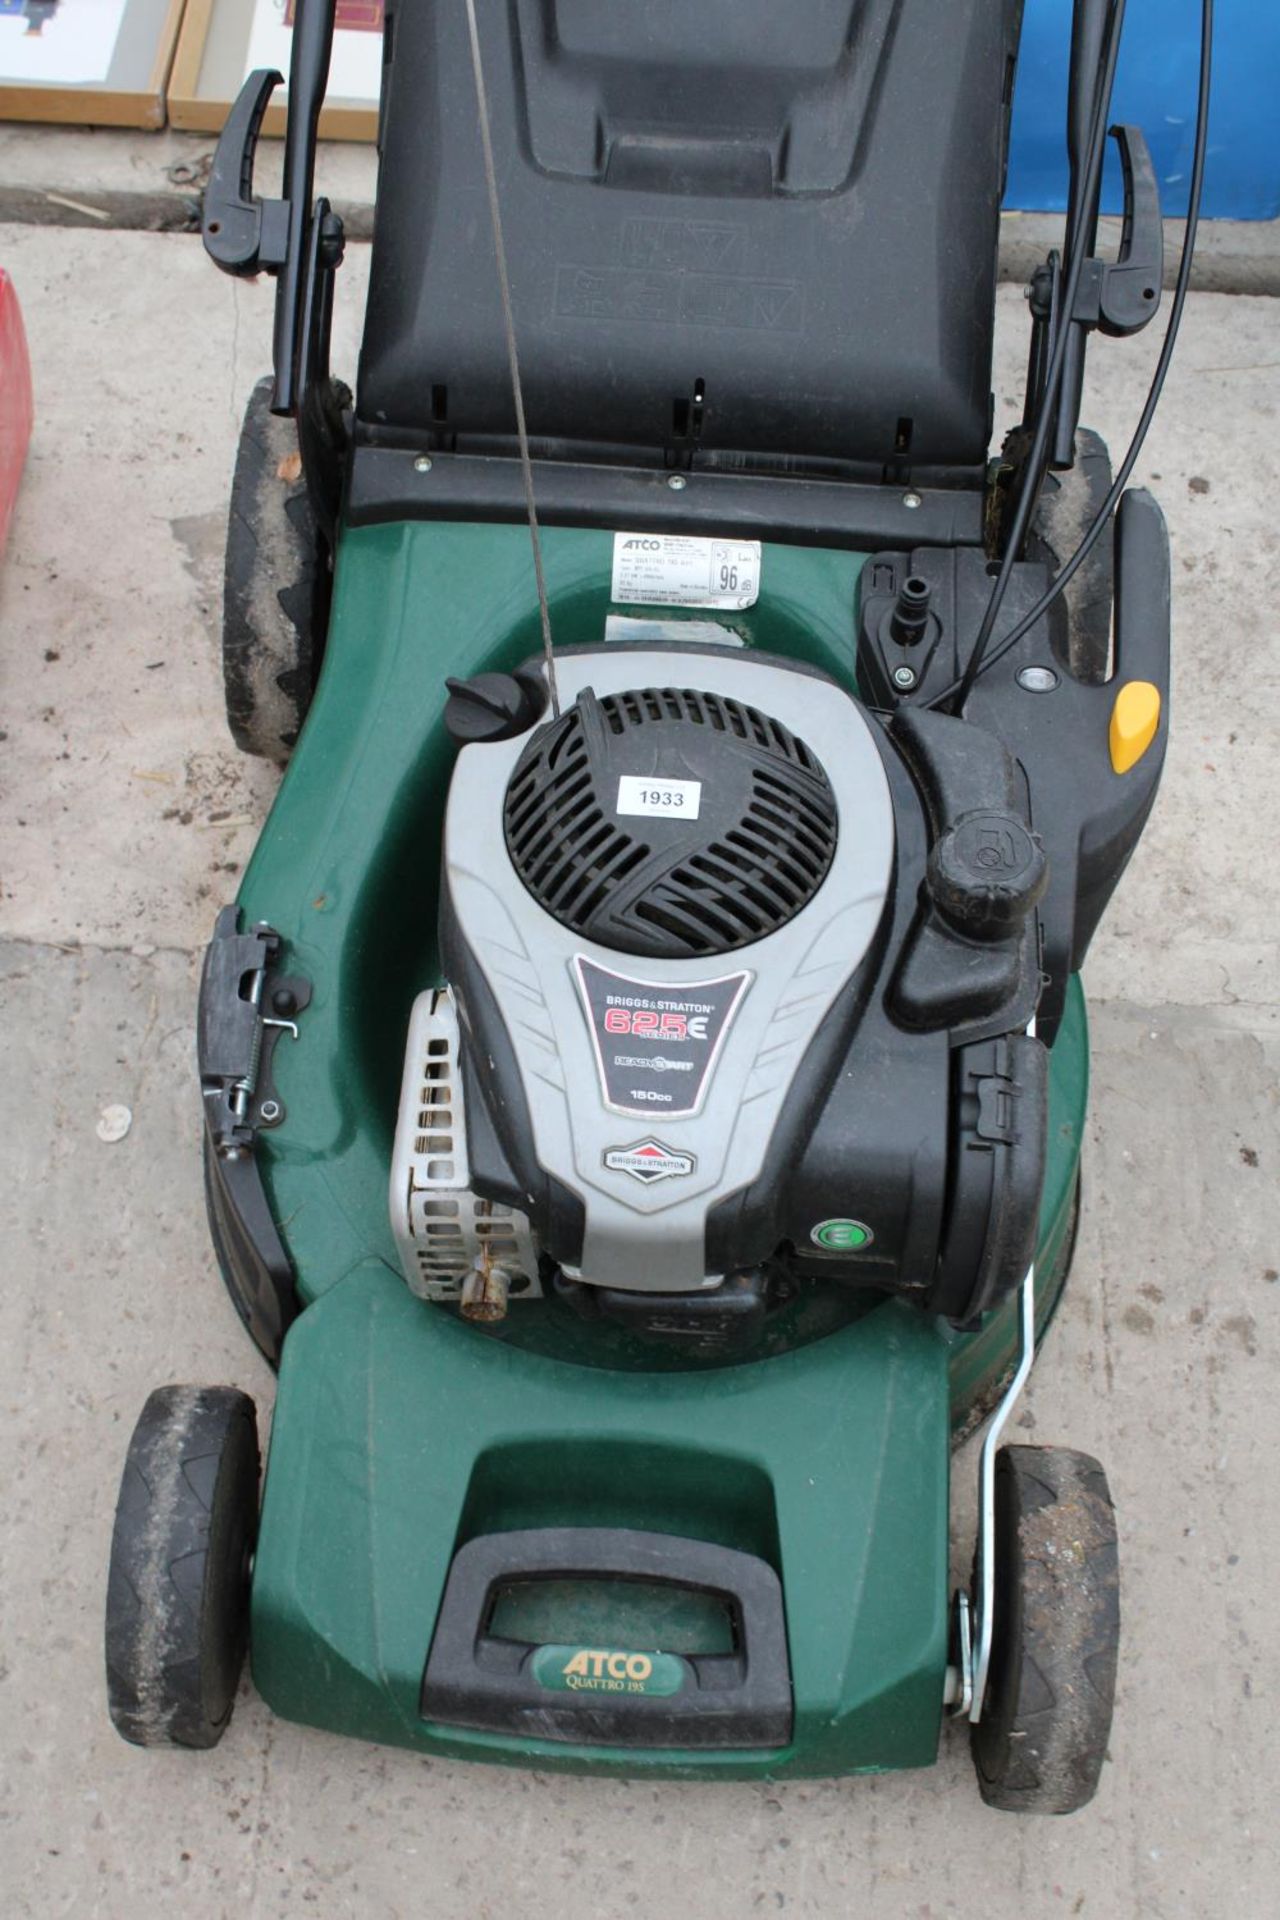 AN ATCO PETROL LAWN MOWER WITH GRASS BOX AND BRIGGS AND STRATTON ENGINE - Bild 2 aus 4